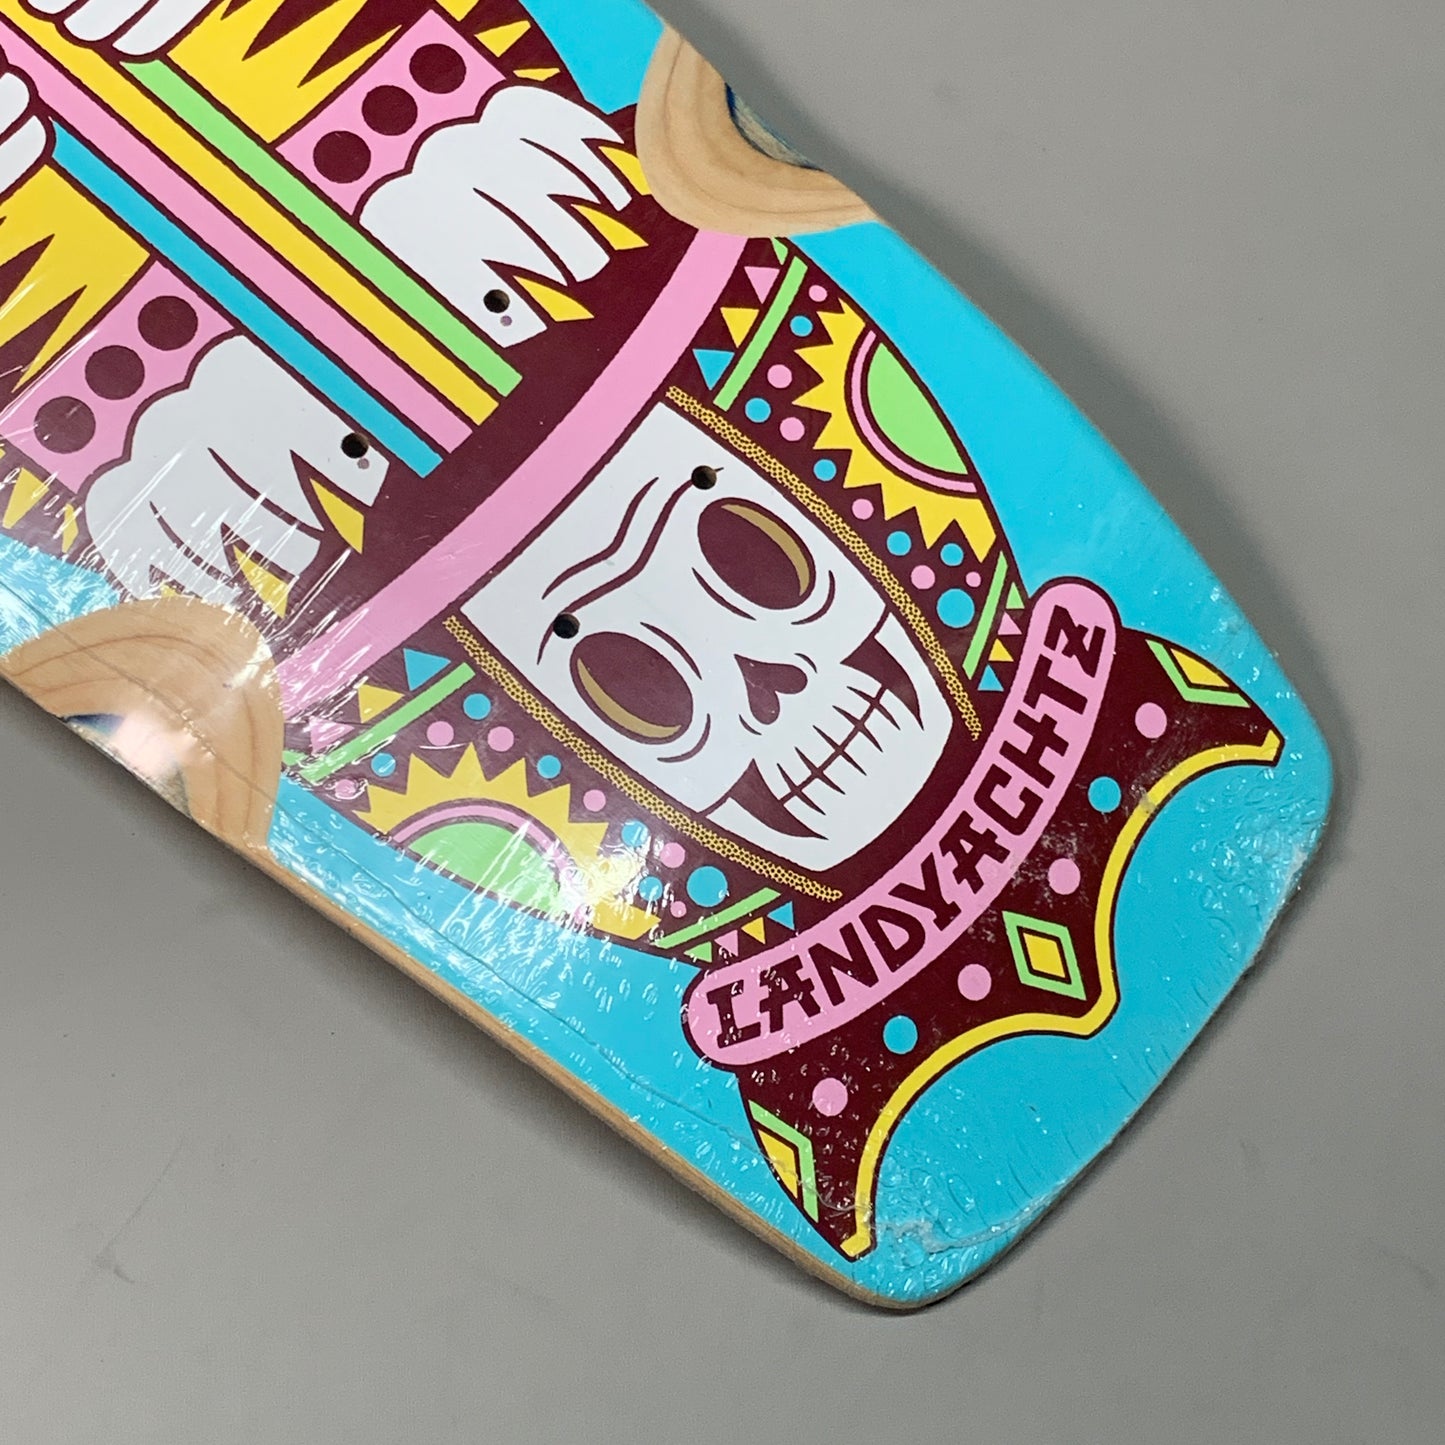 LANDYACHTZ Longboard Dinghy Coffin Kitty Cruiser Kicktail Sanded Top 28.5"x8" (New Other)